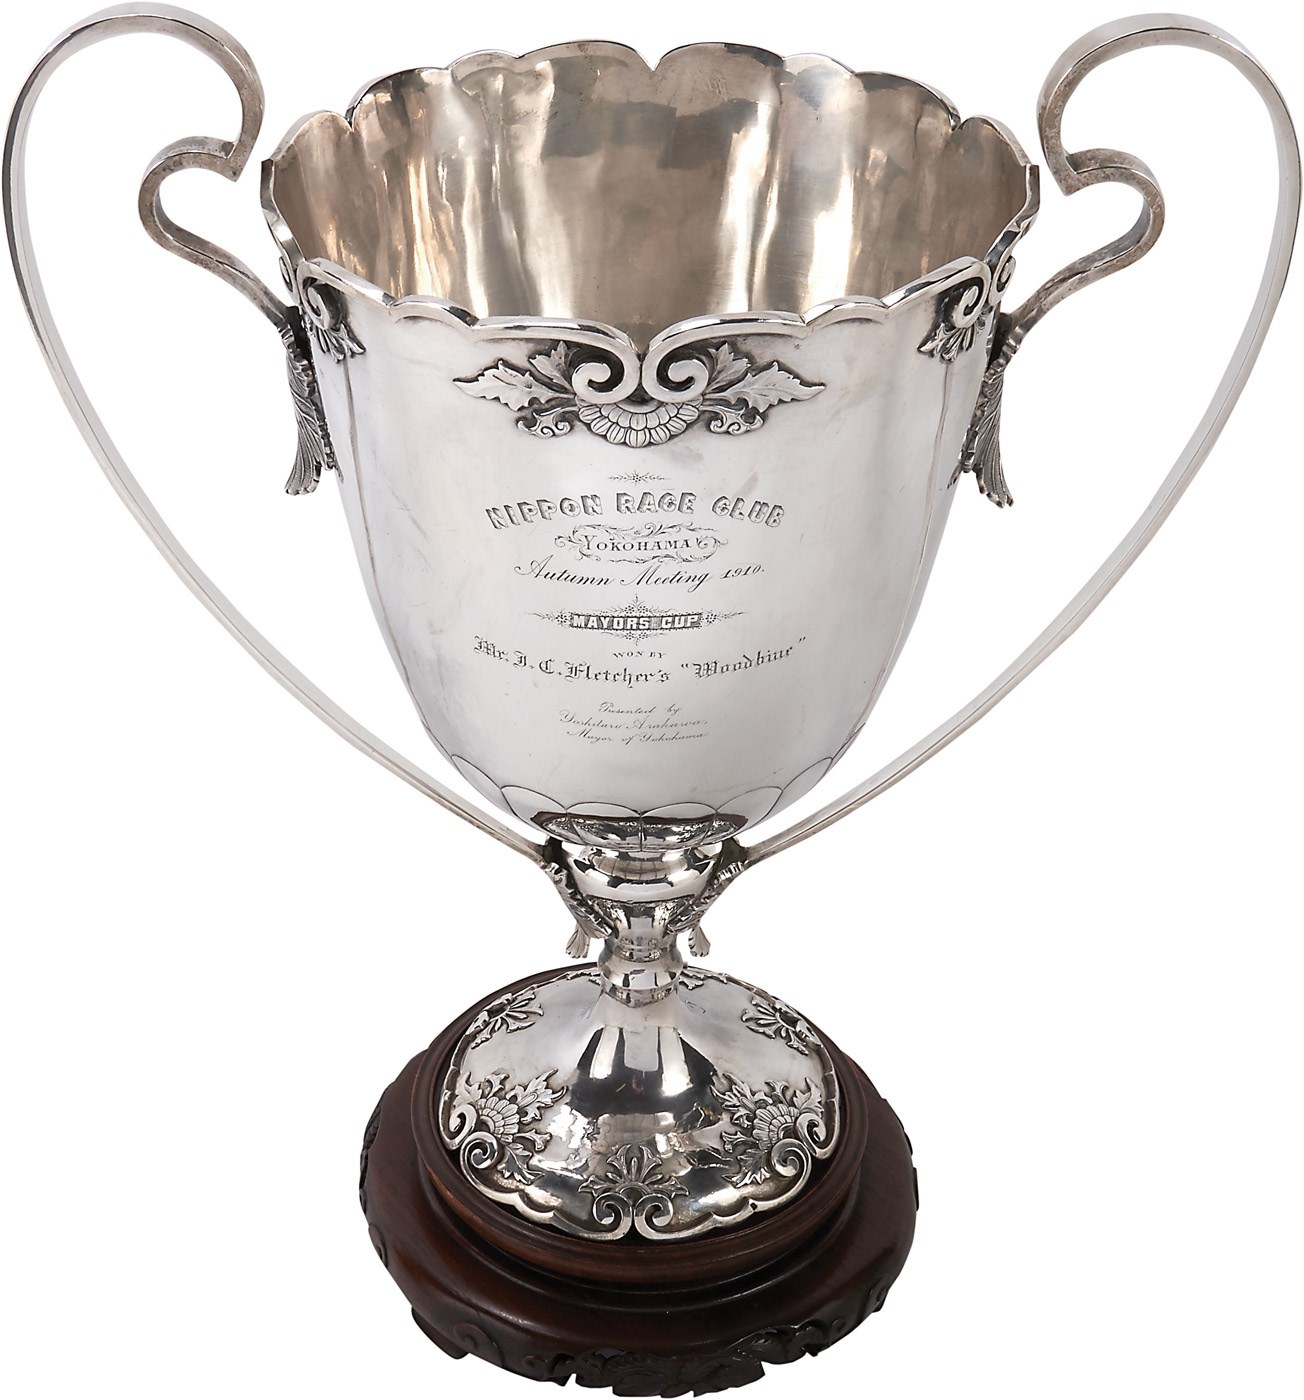 Horse Racing - Incredible 1910 "Mayor's Cup" - Japanese Silver Trophy Presented to "Woodbine"